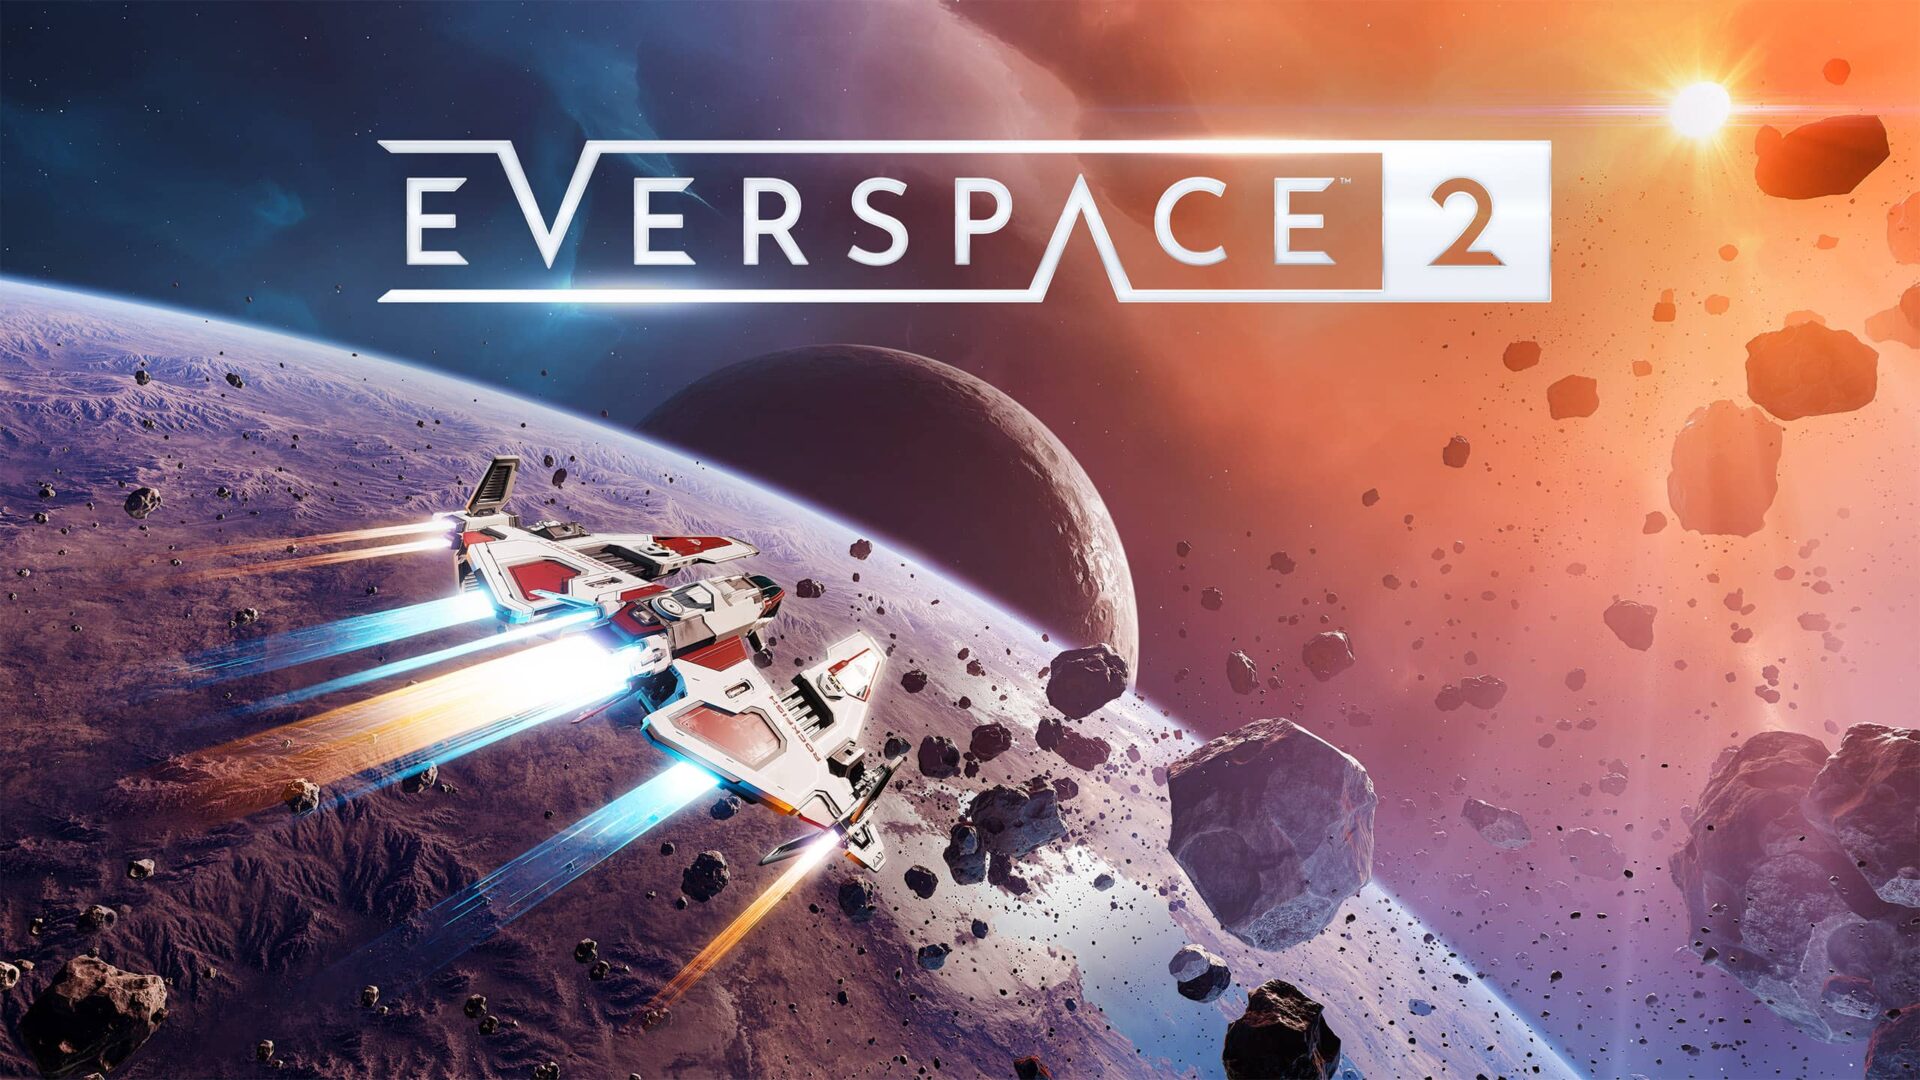 Everspace 2 cover